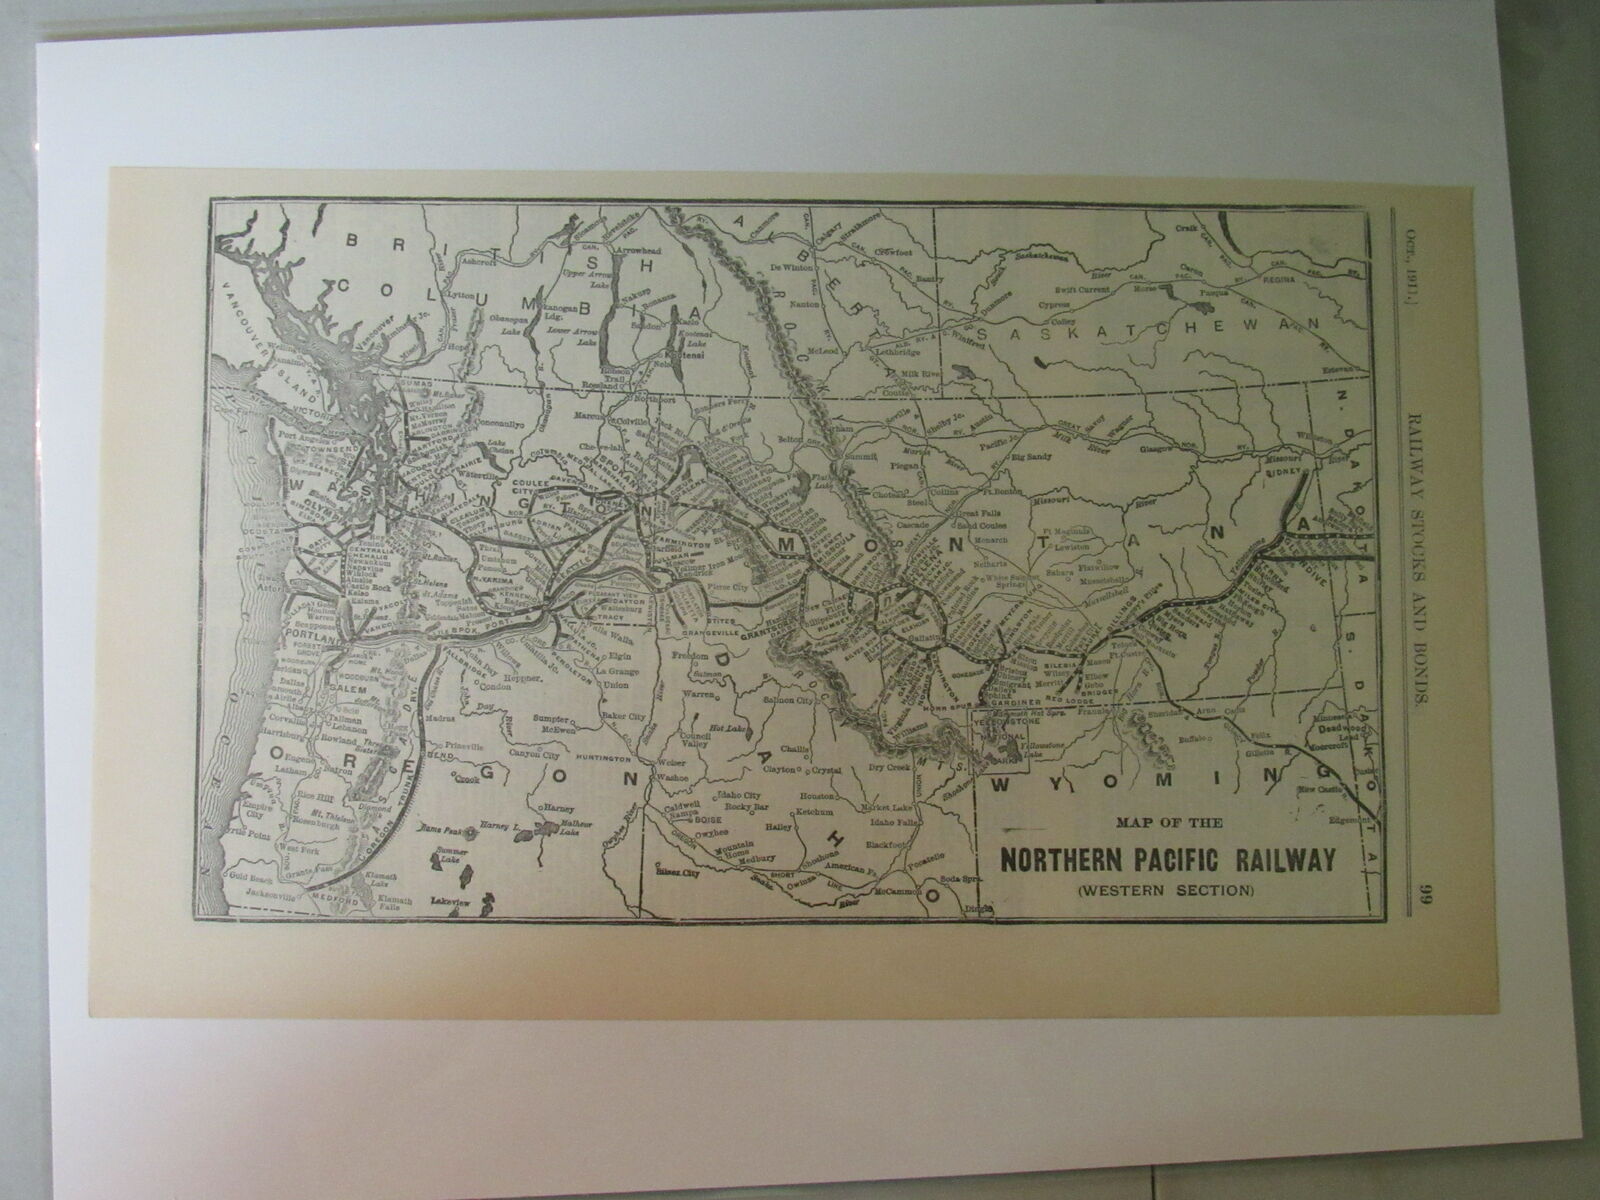 Original map of the Northern Pacific Railway (Western Section) ~ 1911